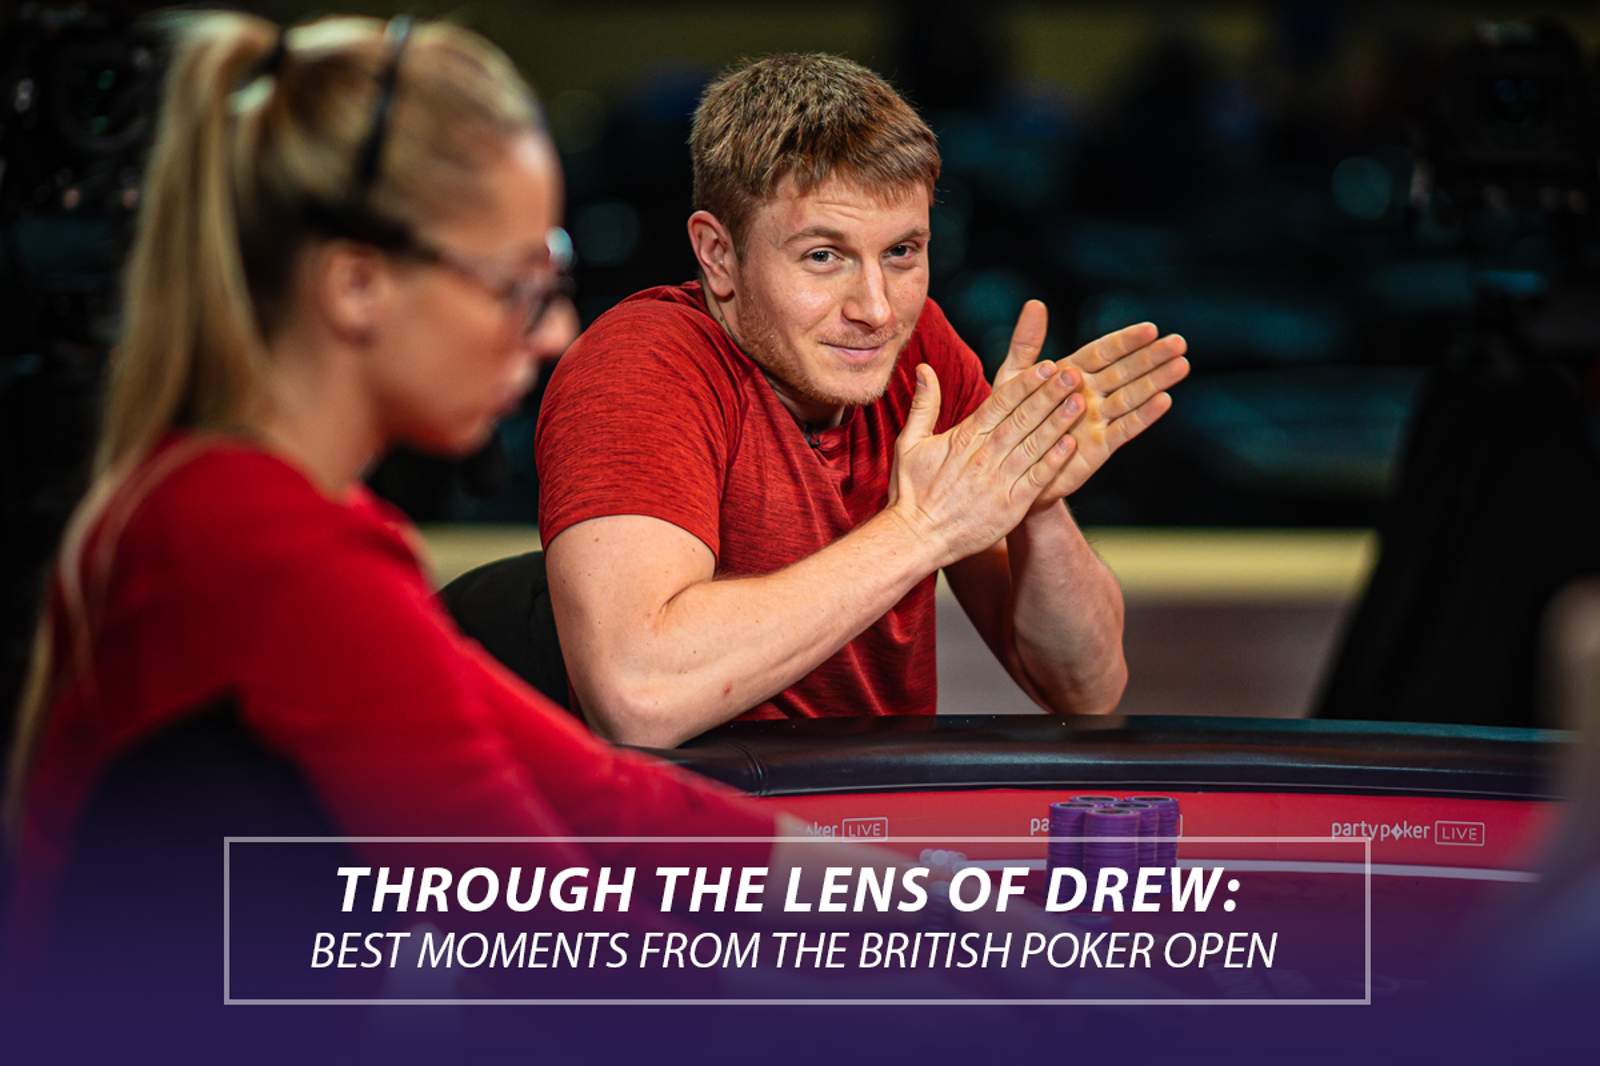 Through the Lens: Best Moments From the British Poker Open